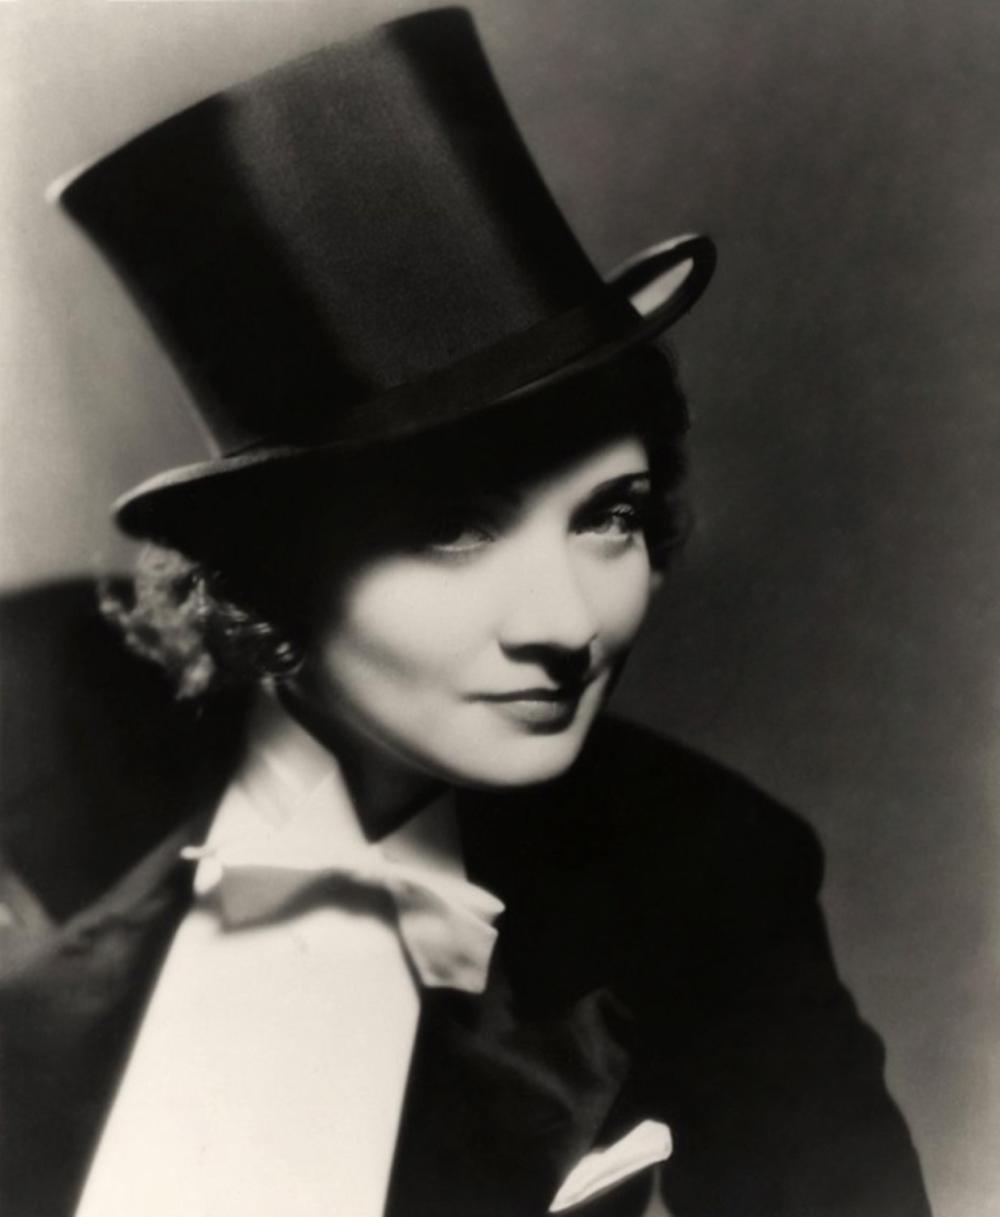 Black and white photo of white woman with curly hair in a top hat and formal tux